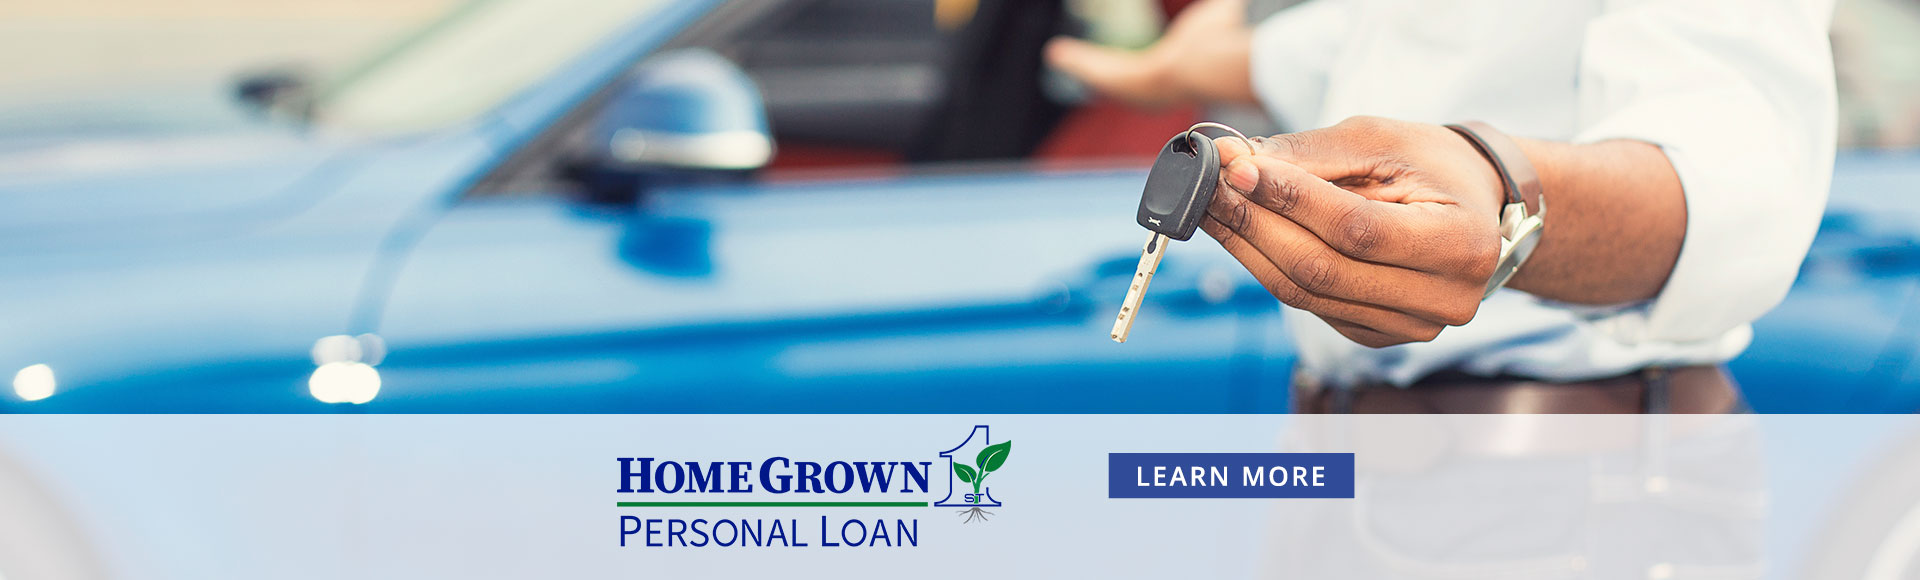 First National Bank in Amboy HomeGrown - Personal Loan